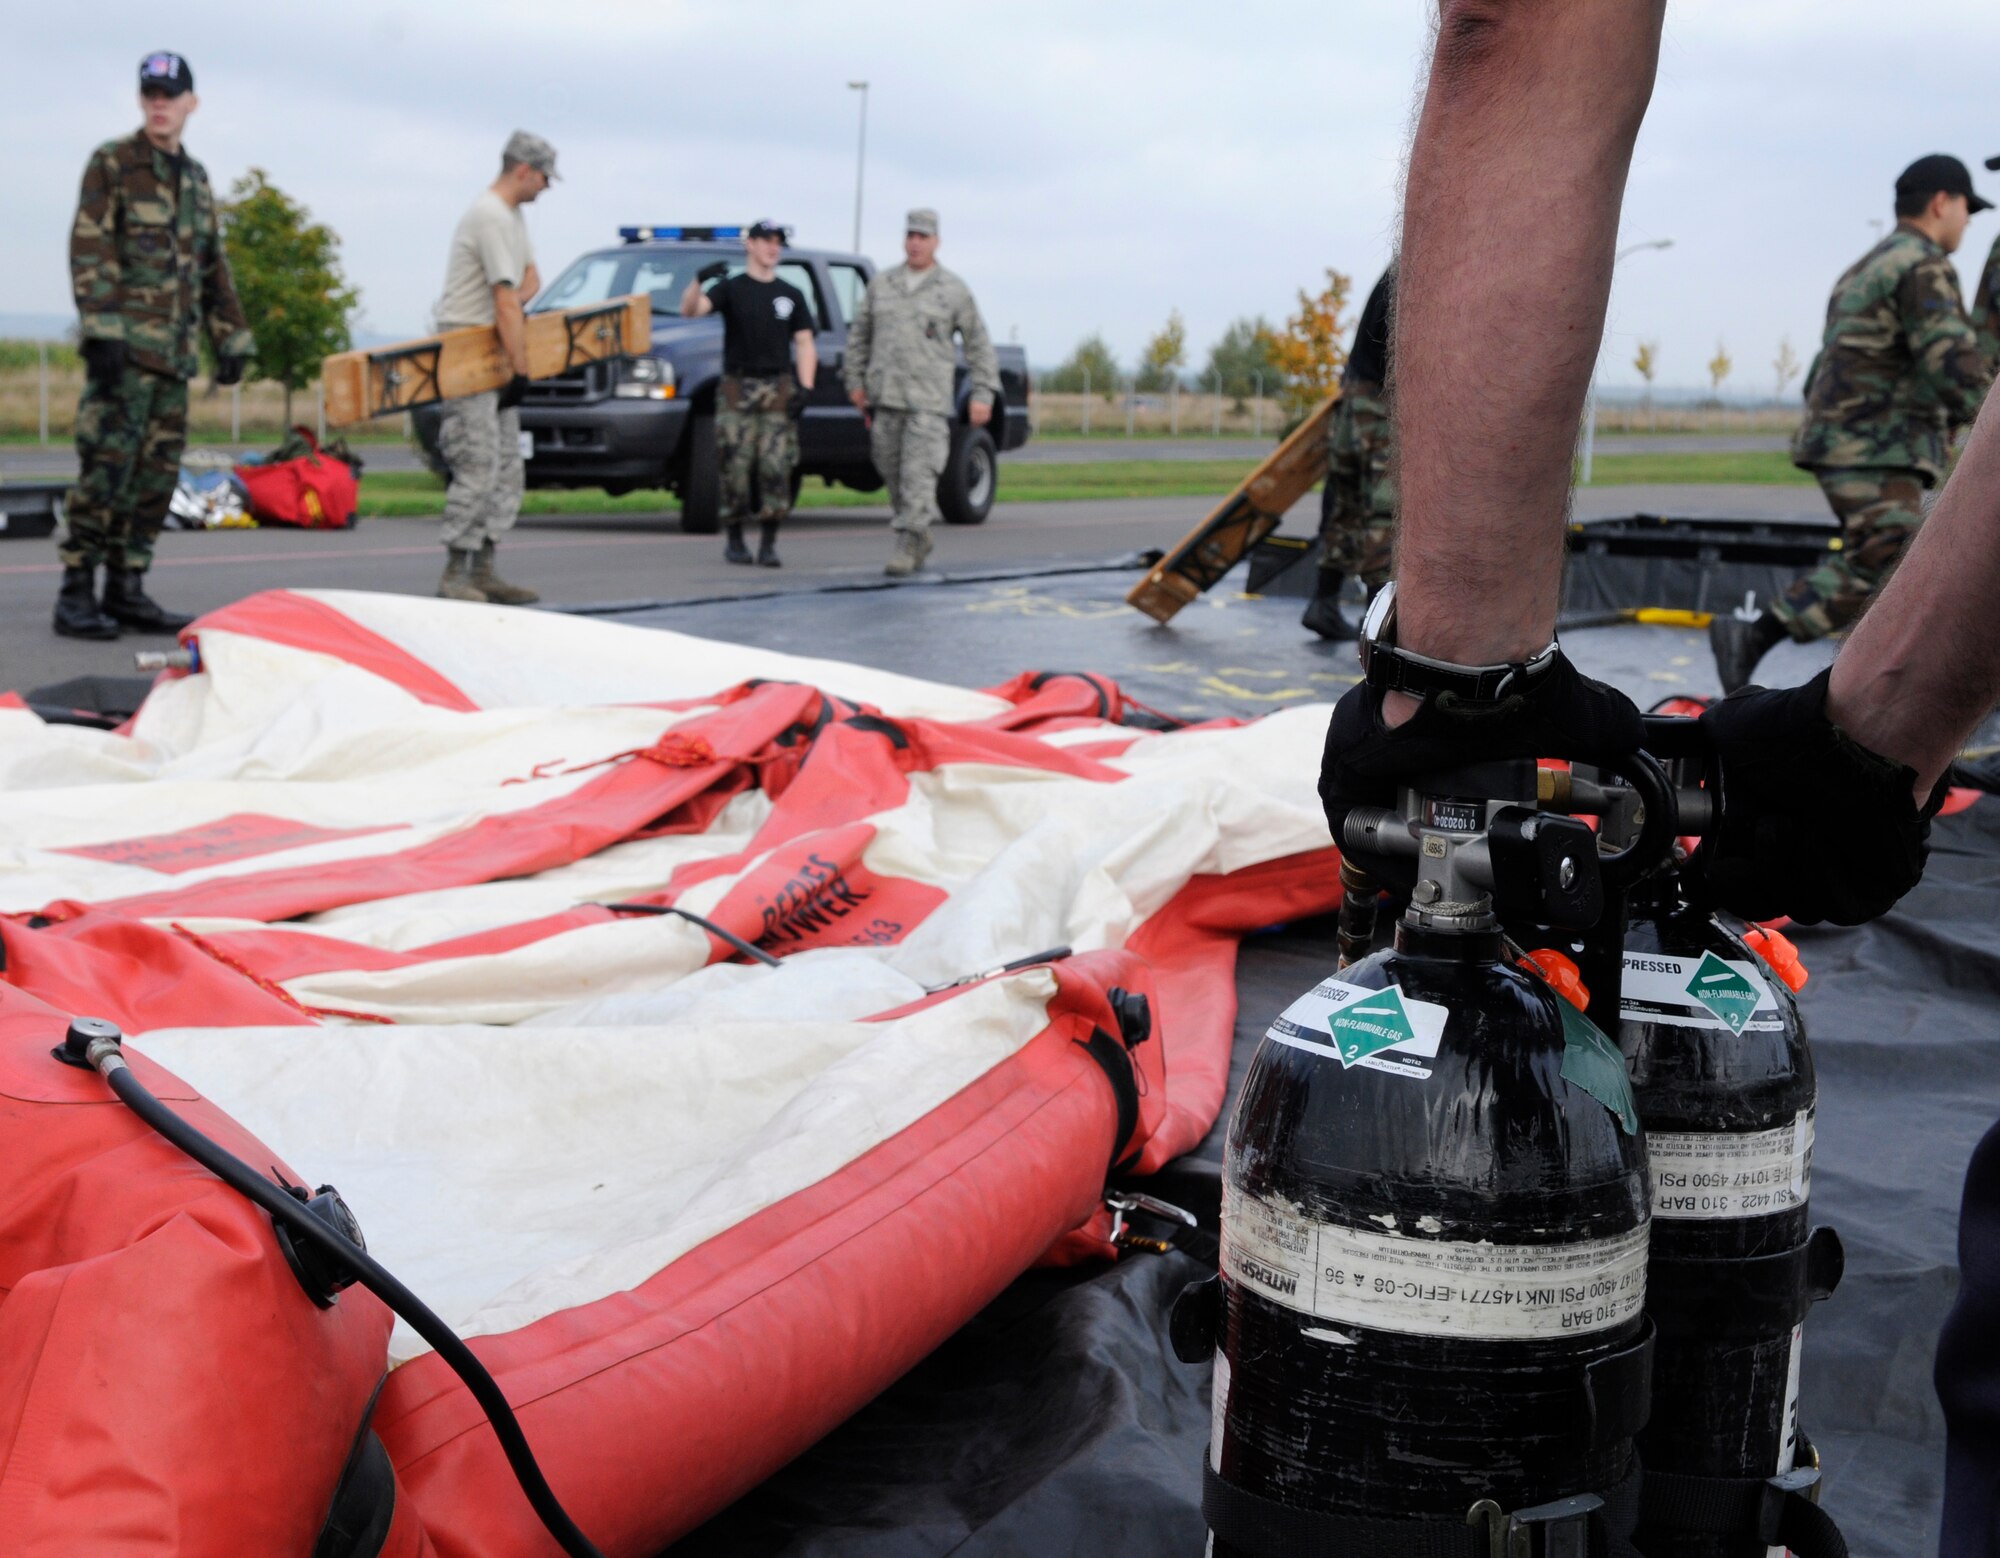 SPANGDAHLEM AIR BASE, Germany – Robert Widowsky, 52nd Civil Engineer Squadron, inflates a decontamination shower to use during an all hazards response training emergency management and mass casualty exercise Oct. 7. (U.S. Air Force photo/Airman 1st Class Staci Miller)